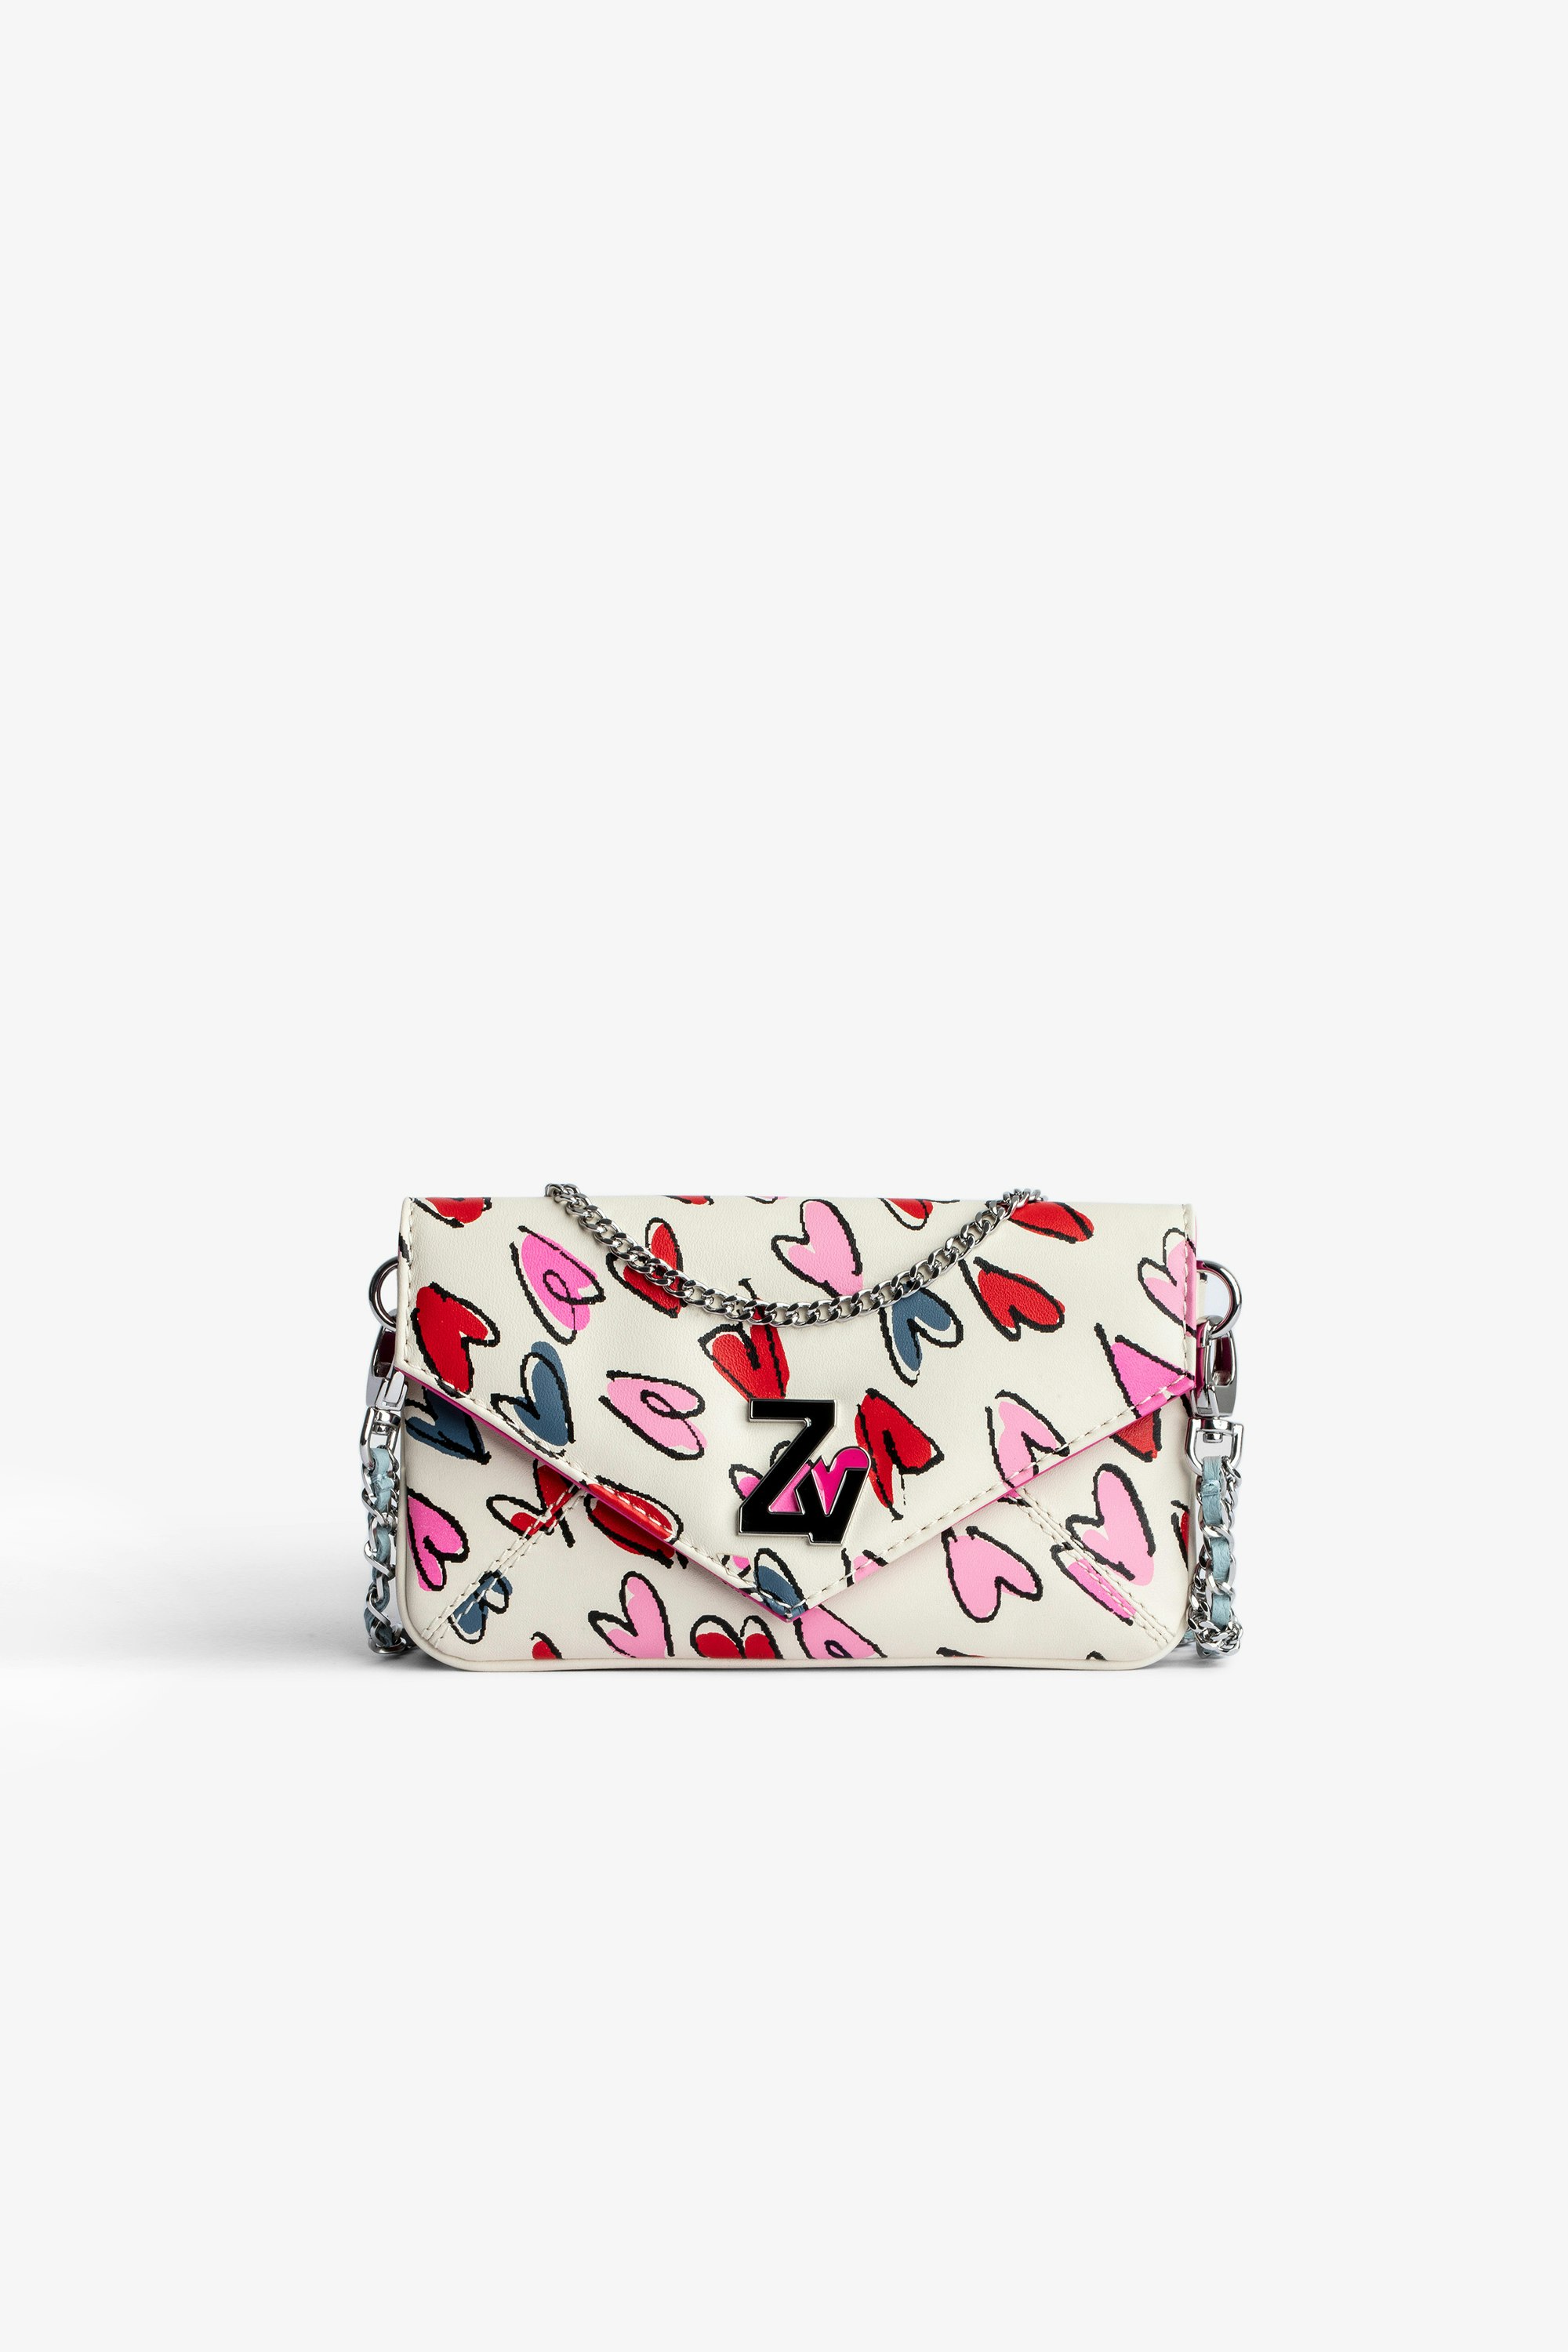 Rockeur ミニクラッチバッグ Women’s clutch in white leather featuring red and pink hearts